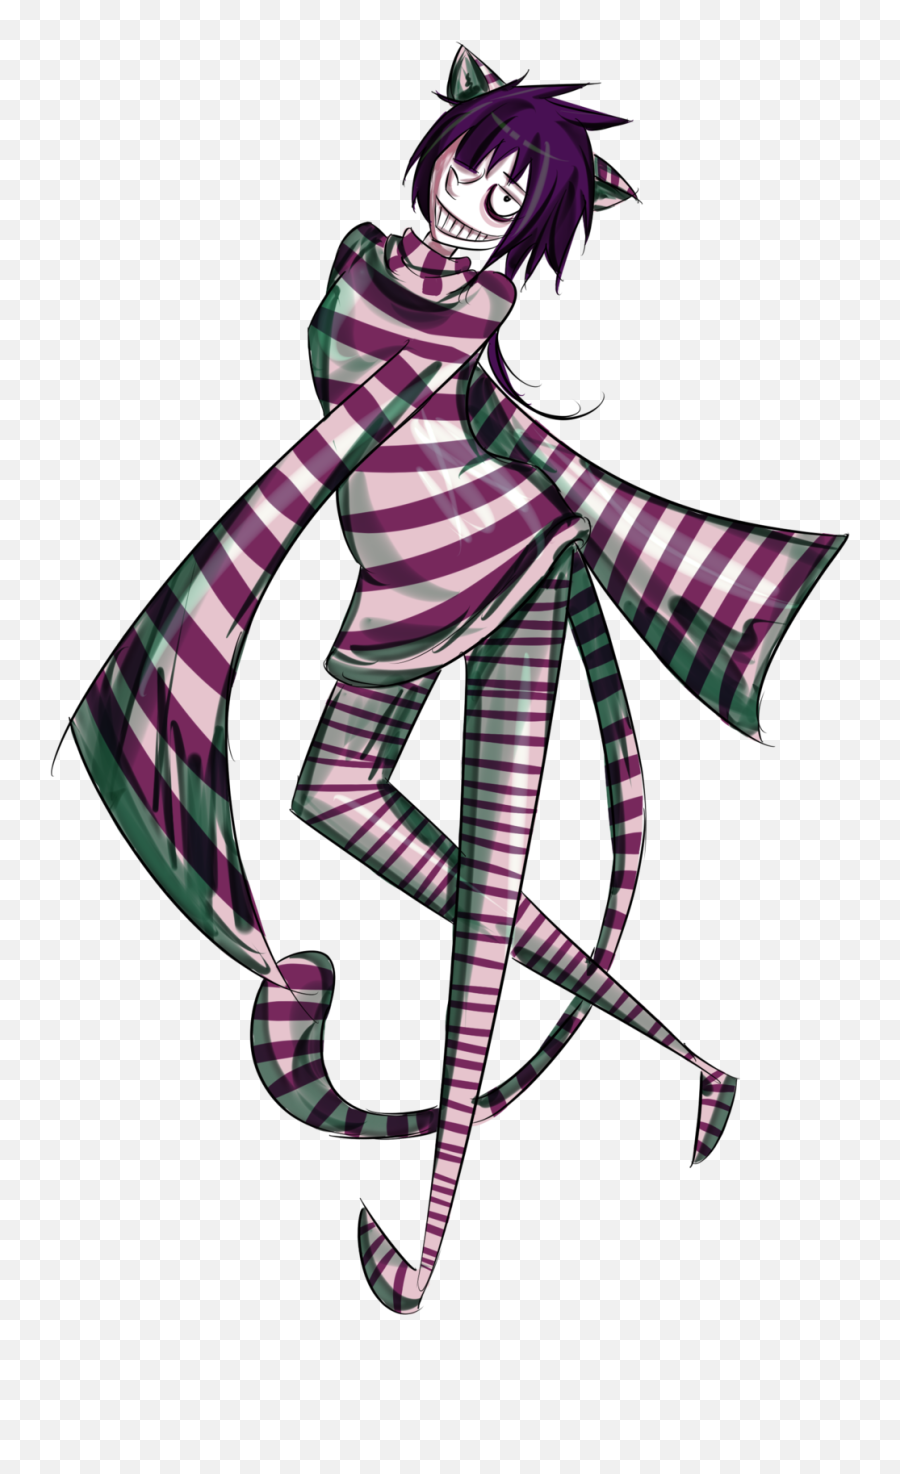 Funny Cheshire Cat Drawing Free Image Download Emoji,Cheshire Cat Grin Emoticon